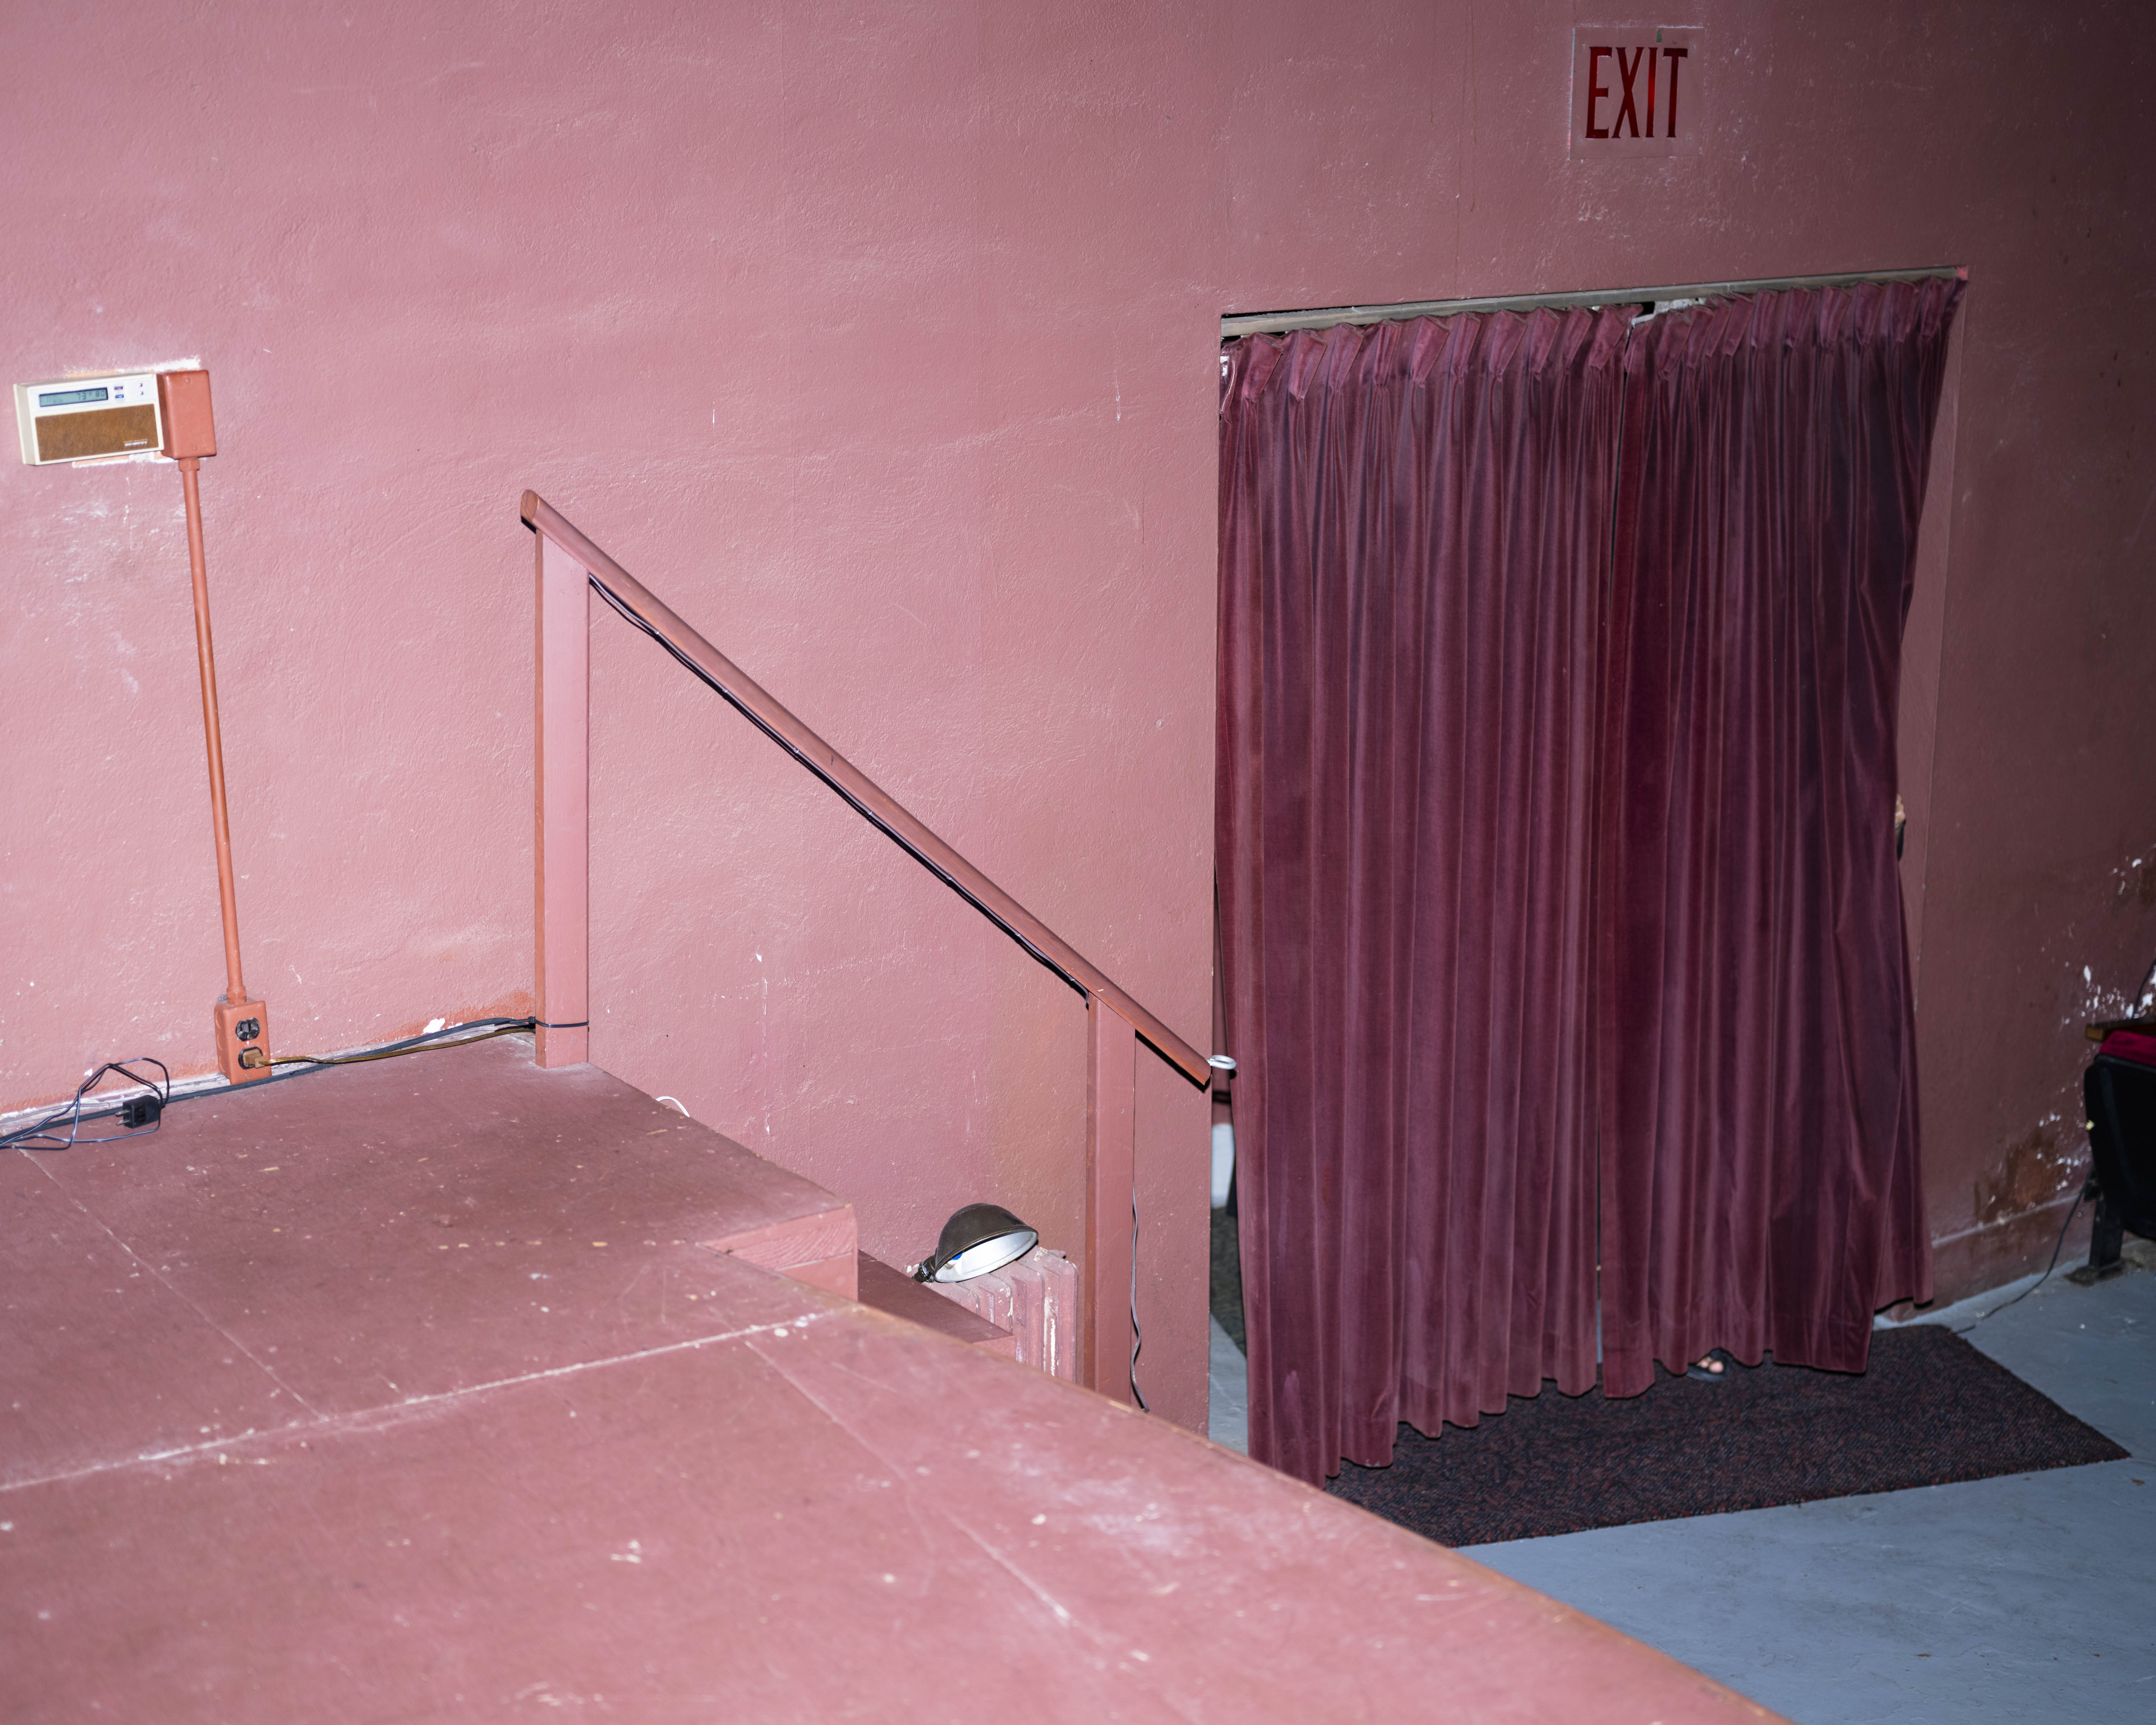 /Photograph%20of%20a%20pink%20wall%20and%20stage.%20On%20the%20floor%20sits%20a%20doorway%20covered%20by%20a%20fushia%20velvet%20curtain.%20Behind%20the%20curtain%20an%20obscured%20person.%20Exit%20sign%20sits%20above%20the%20curtain%20%20